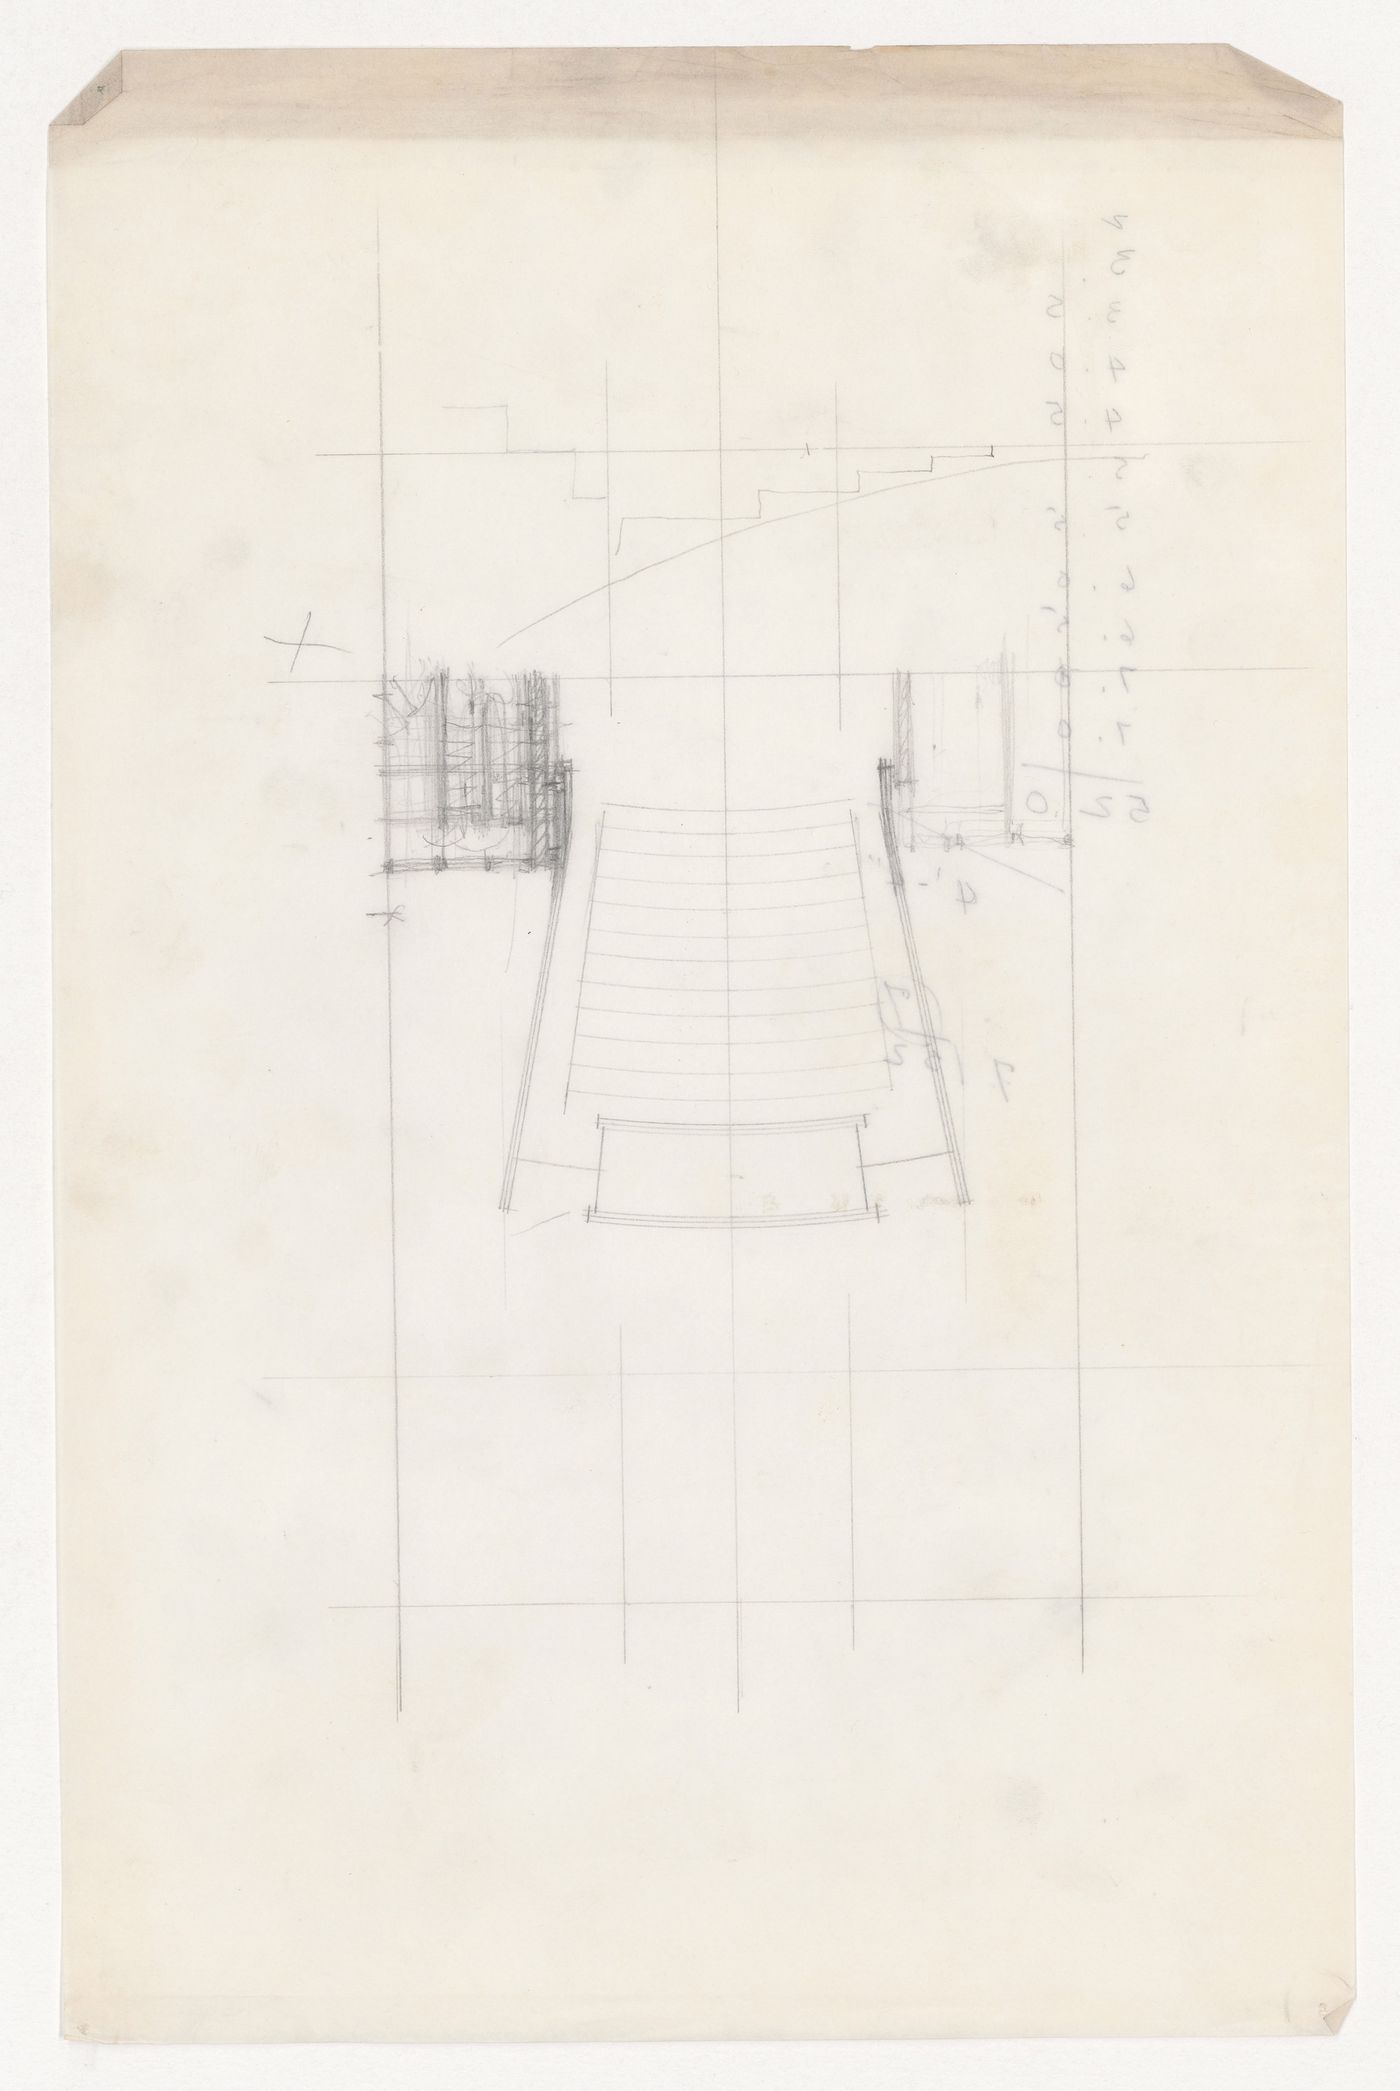 Plan for an auditorium for the Metallurgy Building, Illinois Institute of Technology, Chicago; verso: Calculation, possibly for the Metallurgy Building, Illinois Institute of Technology, Chicago